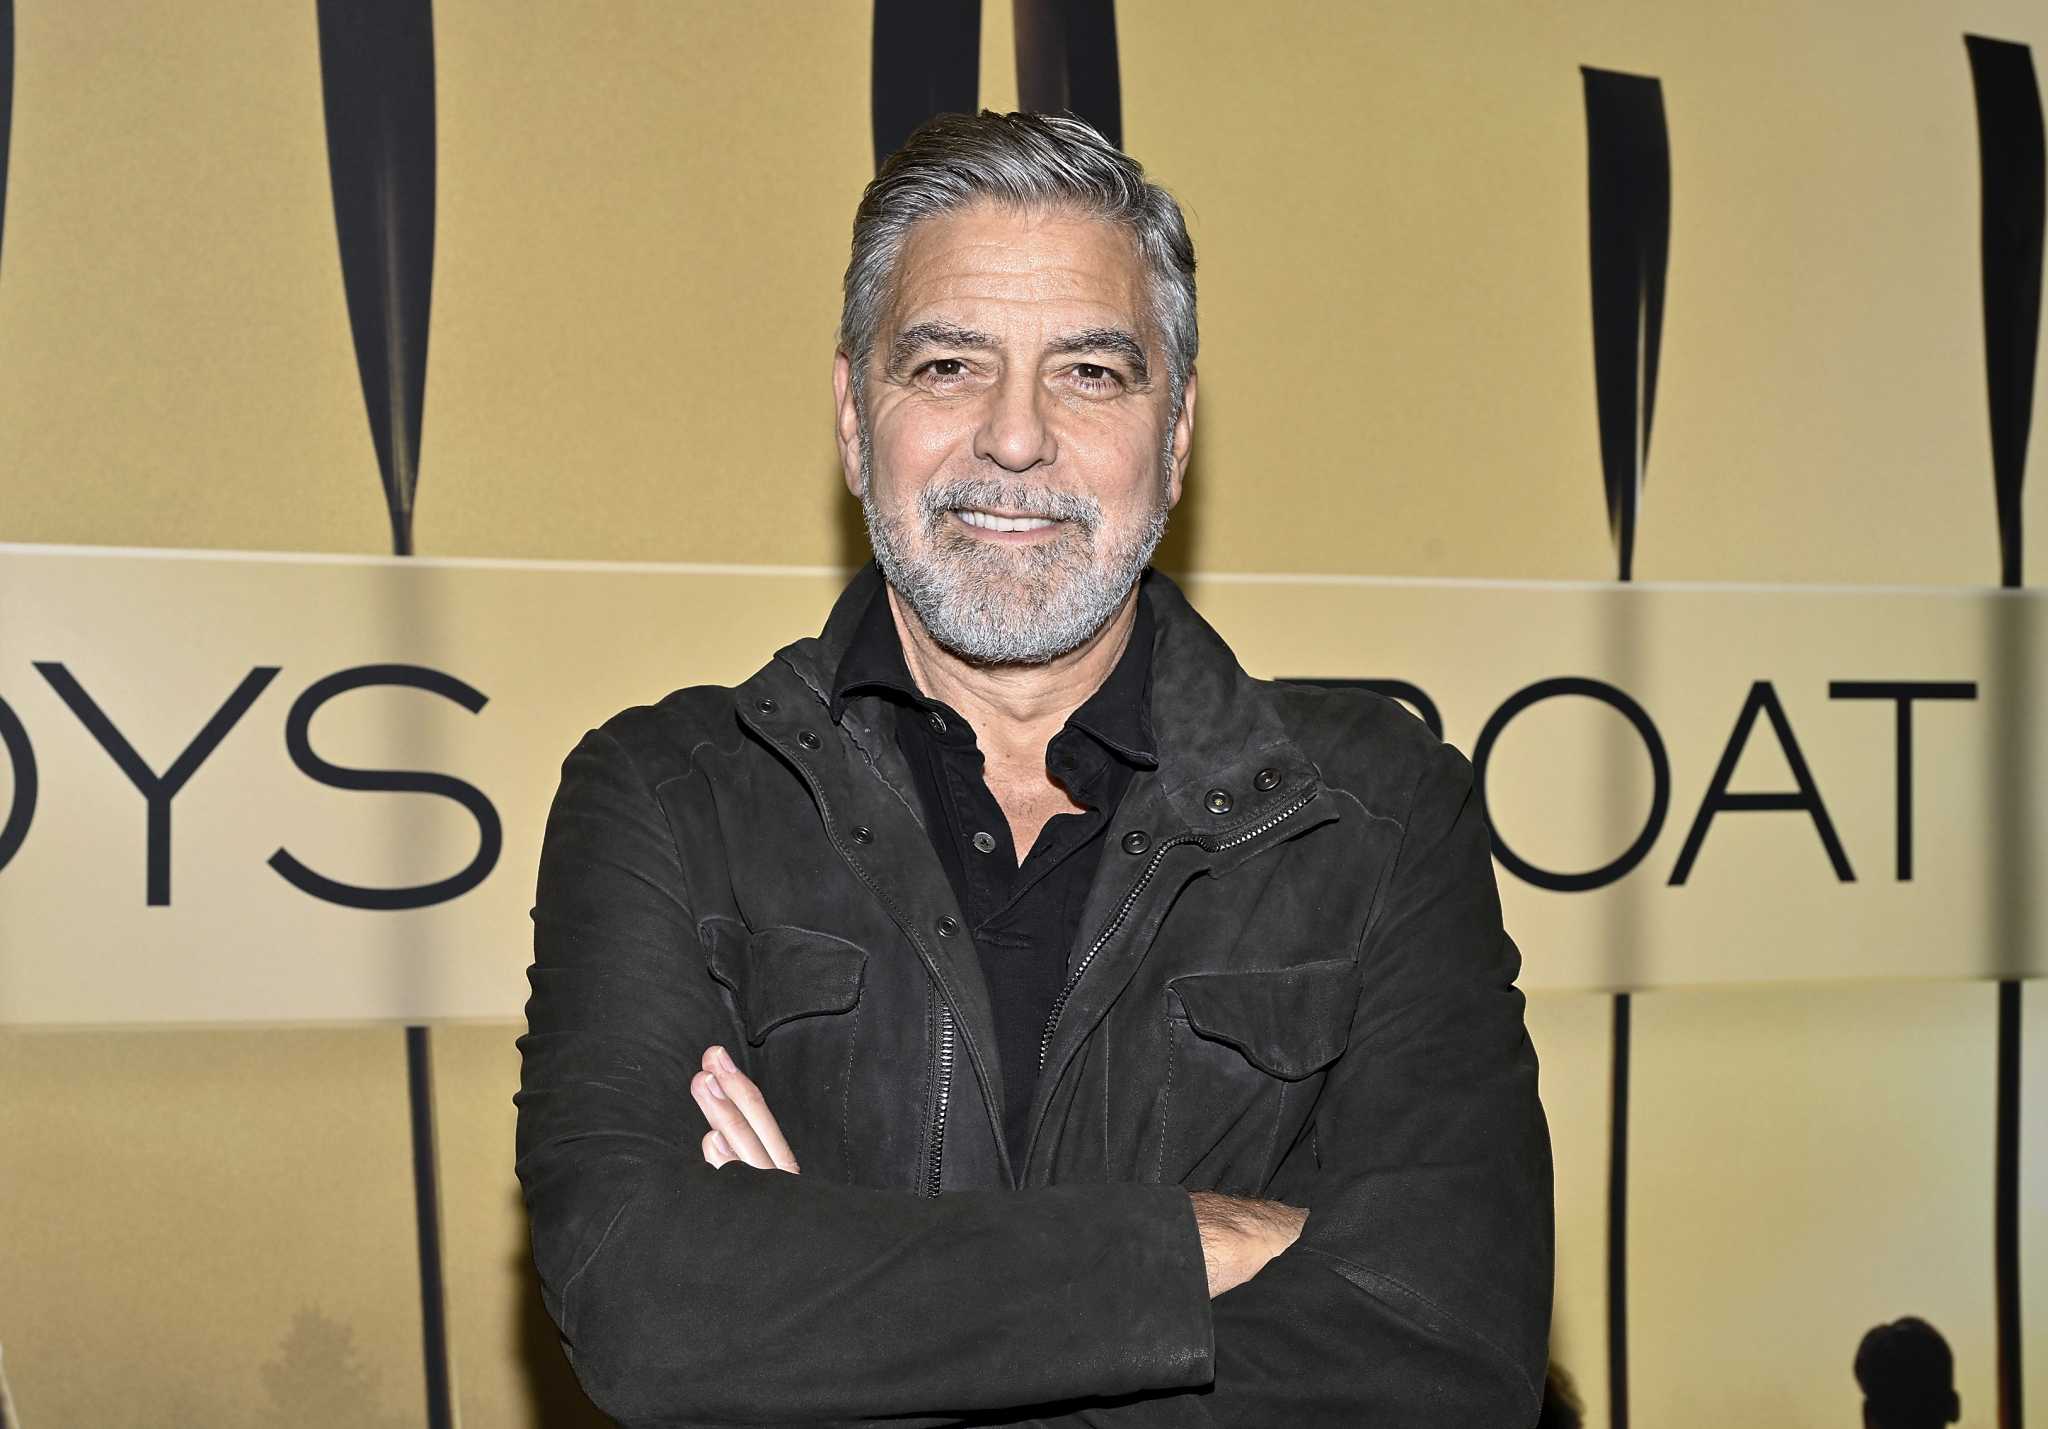 George Clooney to make his Broadway debut in a play version of movie 'Good Night, and Good Luck'